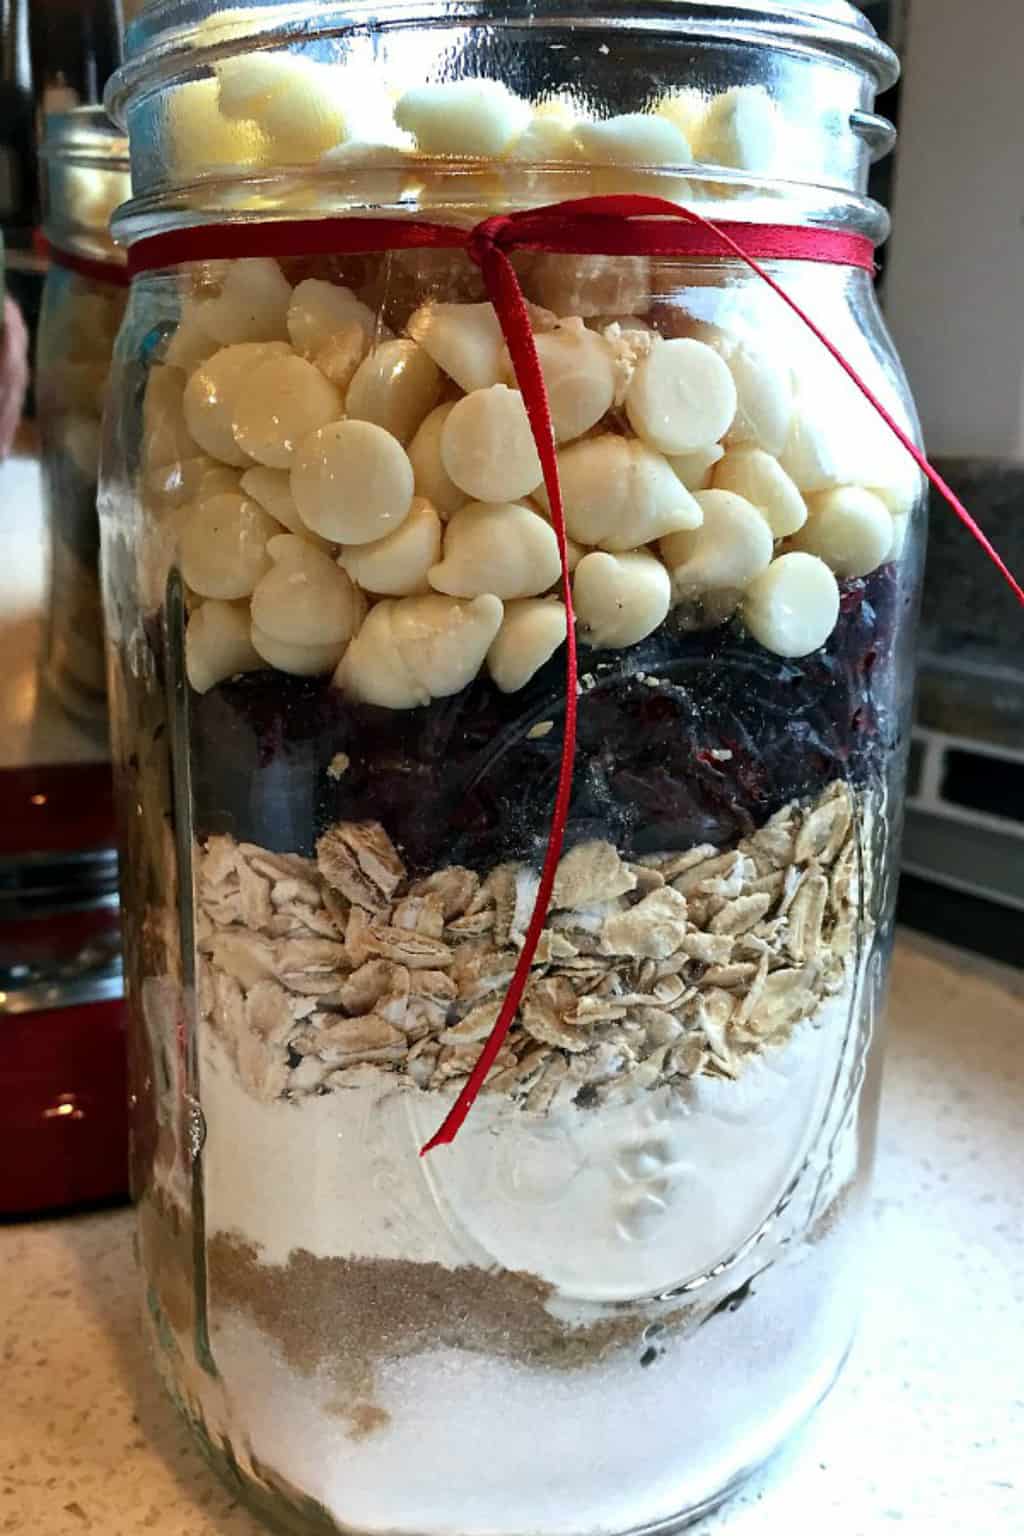 https://reluctantentertainer.com/wp-content/uploads/2015/02/White-Chocolate-Cranberry-Macadamia-Nut-Cookies-in-a-Jar-Recipe-2.jpg